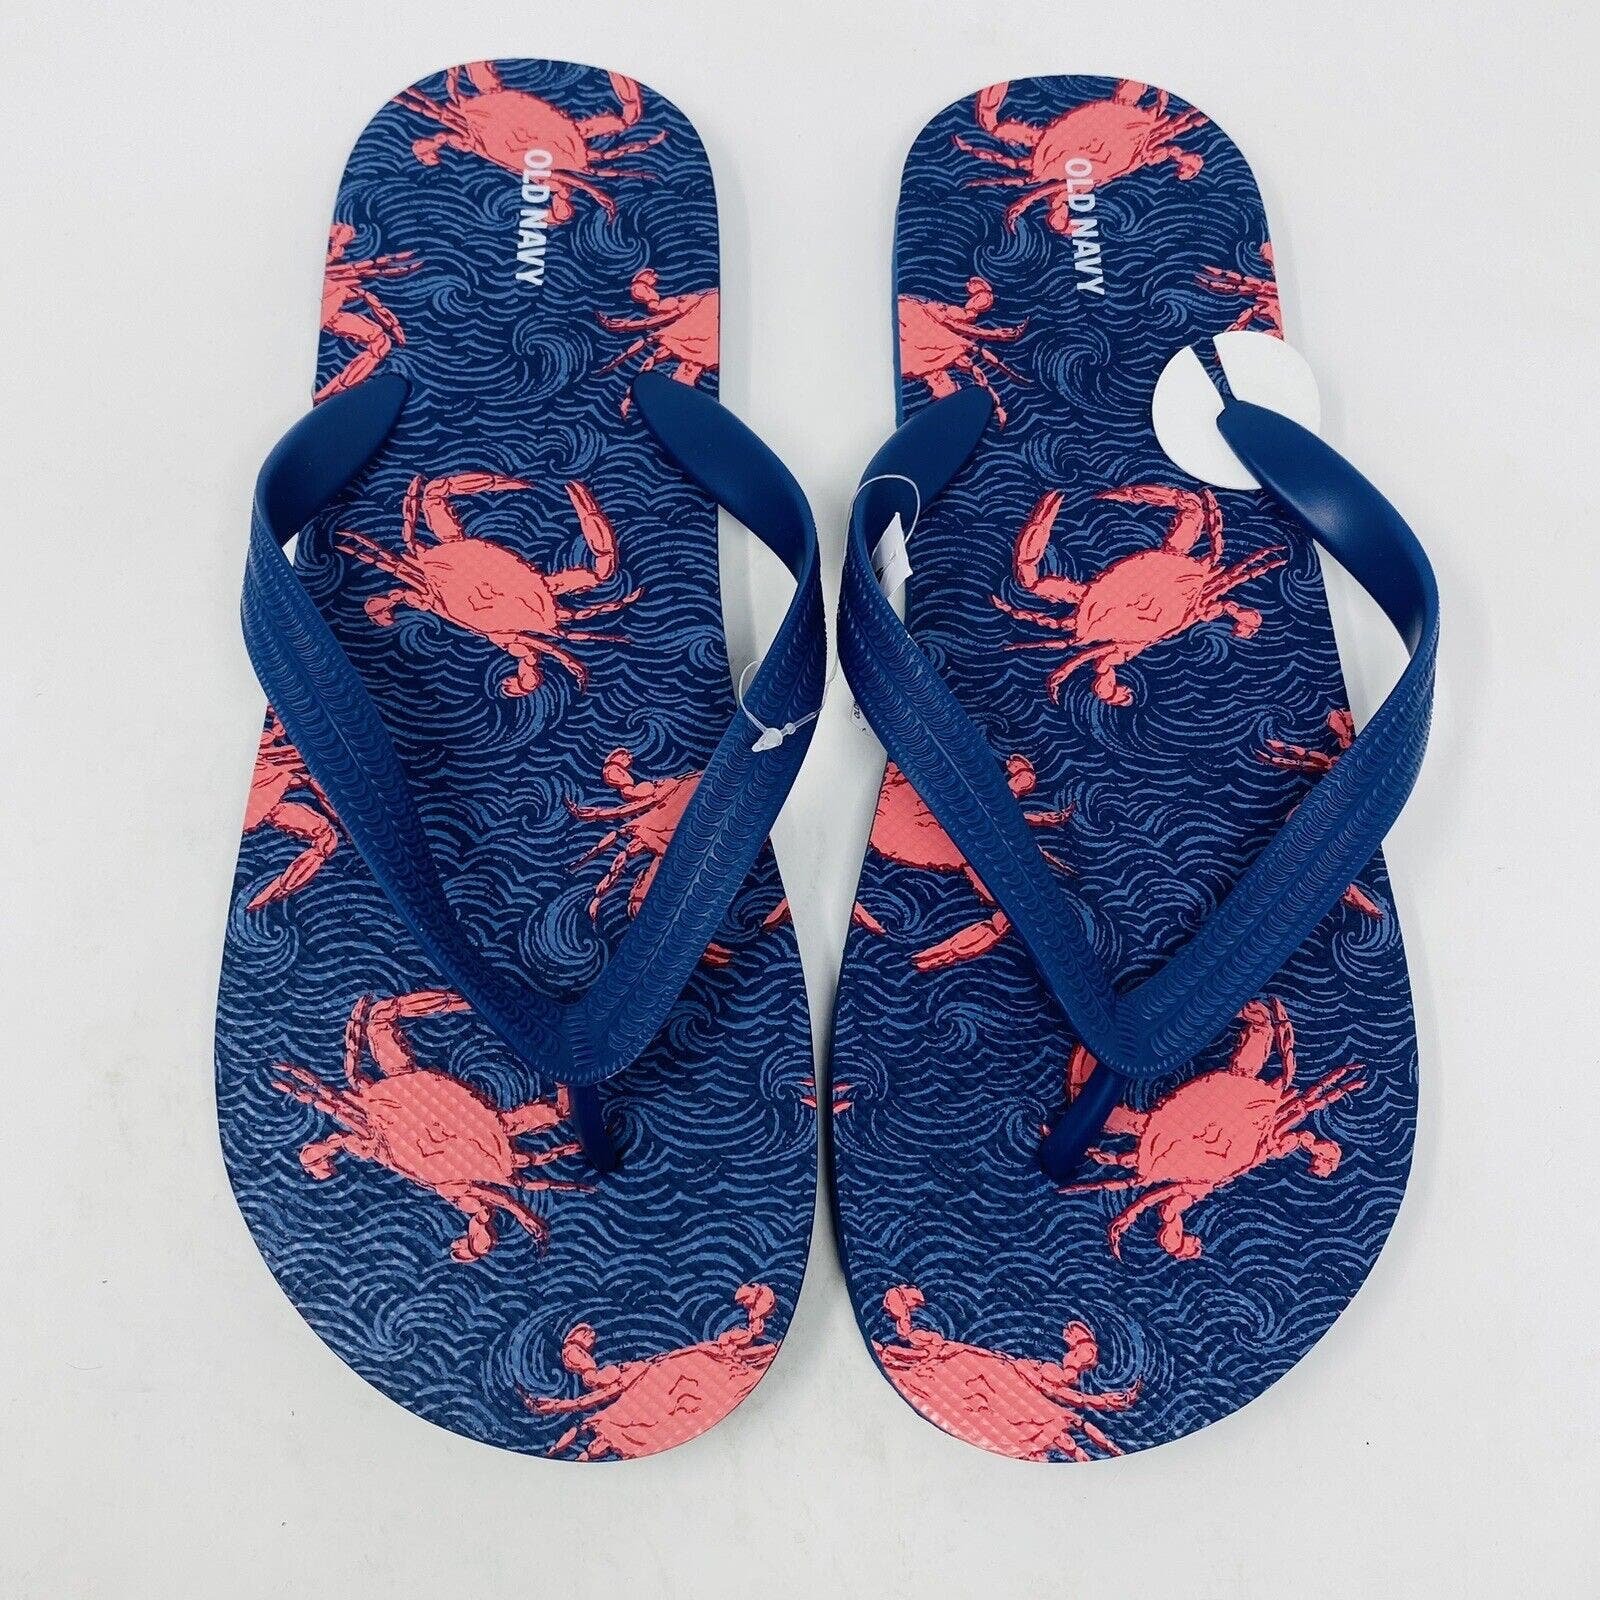 Old Navy Size 10 10.5 11 Sea Crab Print Flip Flops Thong Sandals Navy Blue Red bXIGn1OUF